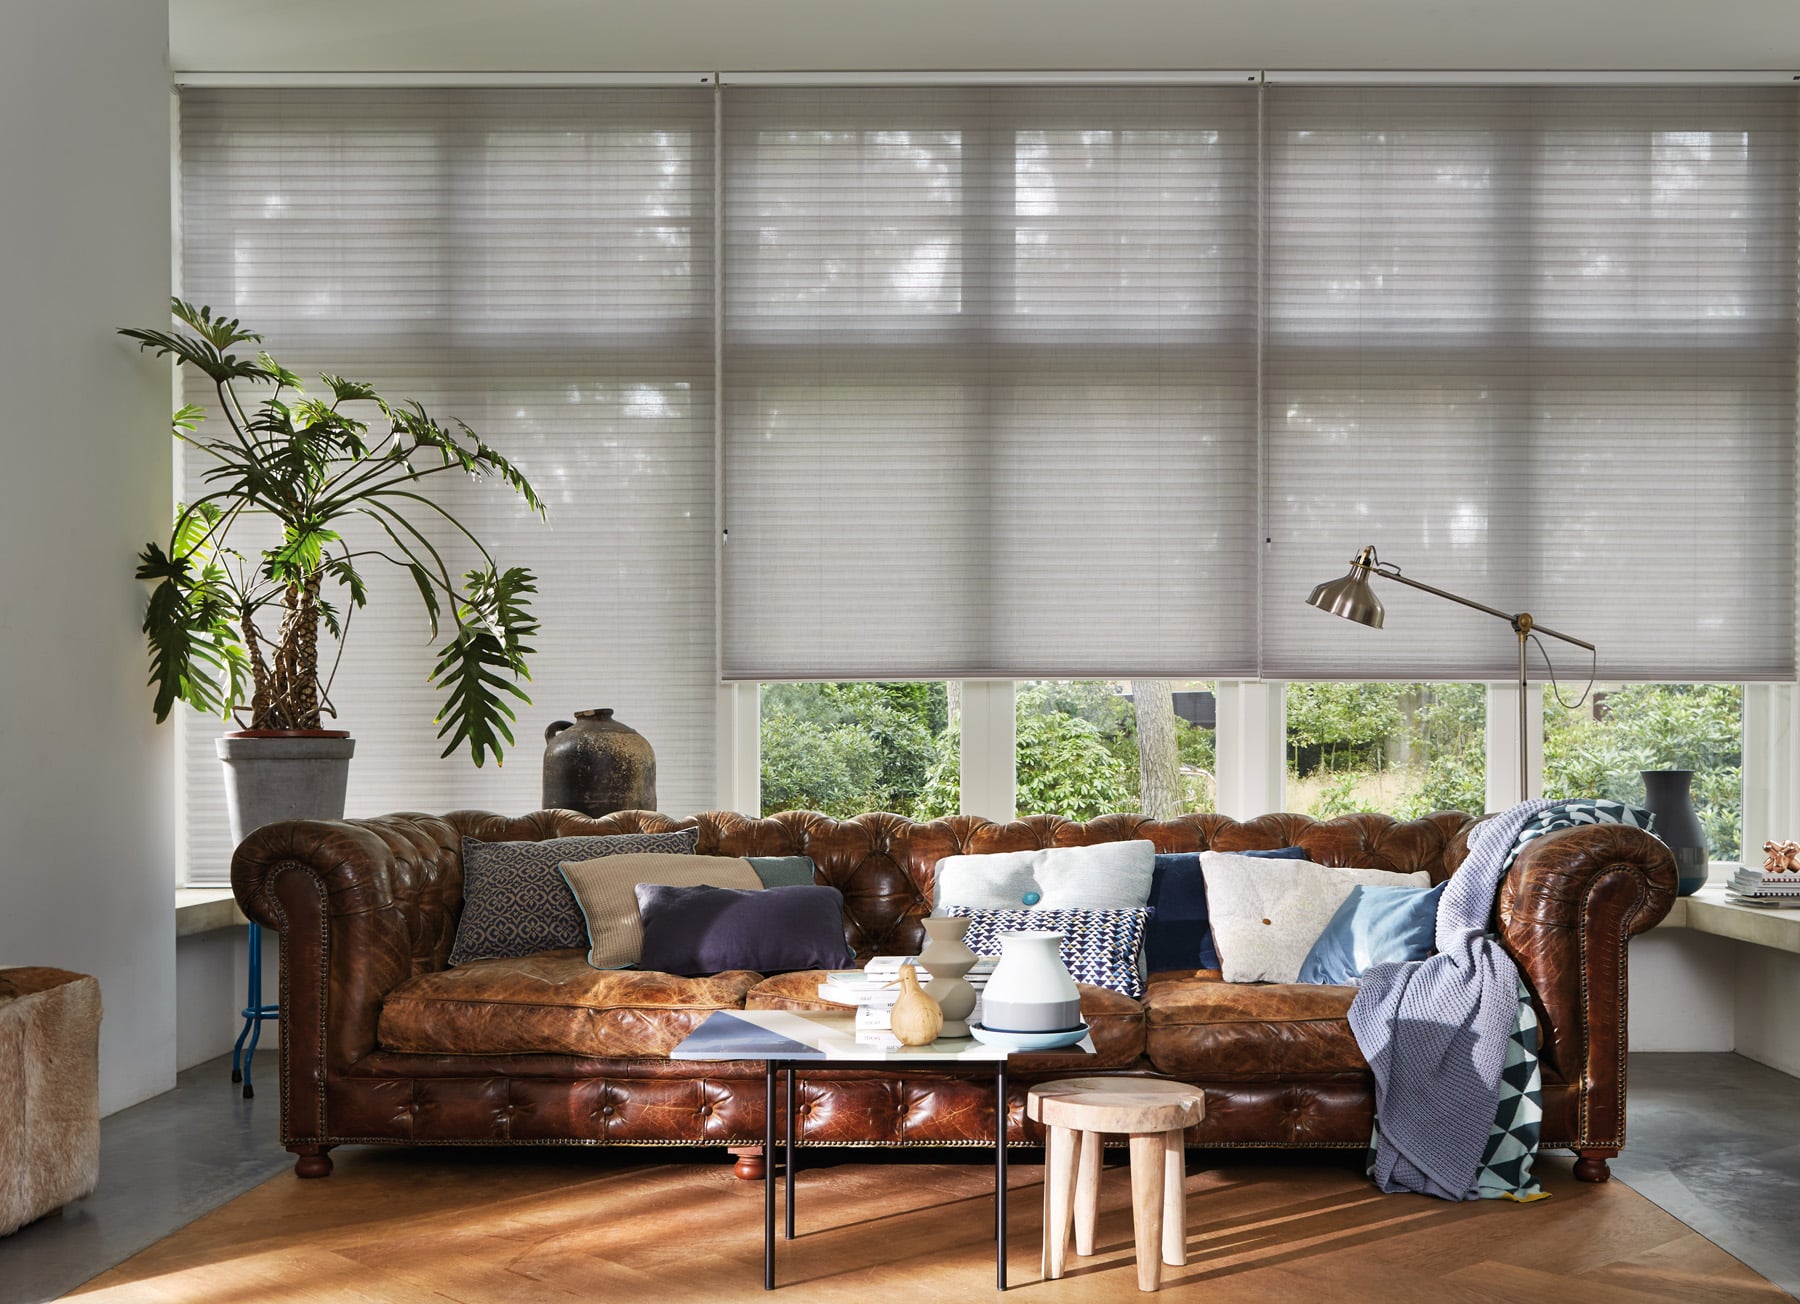 Eclectic style living room with wooden floors and large leather sofa, sheer Luxaflex Duette Shades partially covering large window panes, filtering through sun light. Made in Australia.